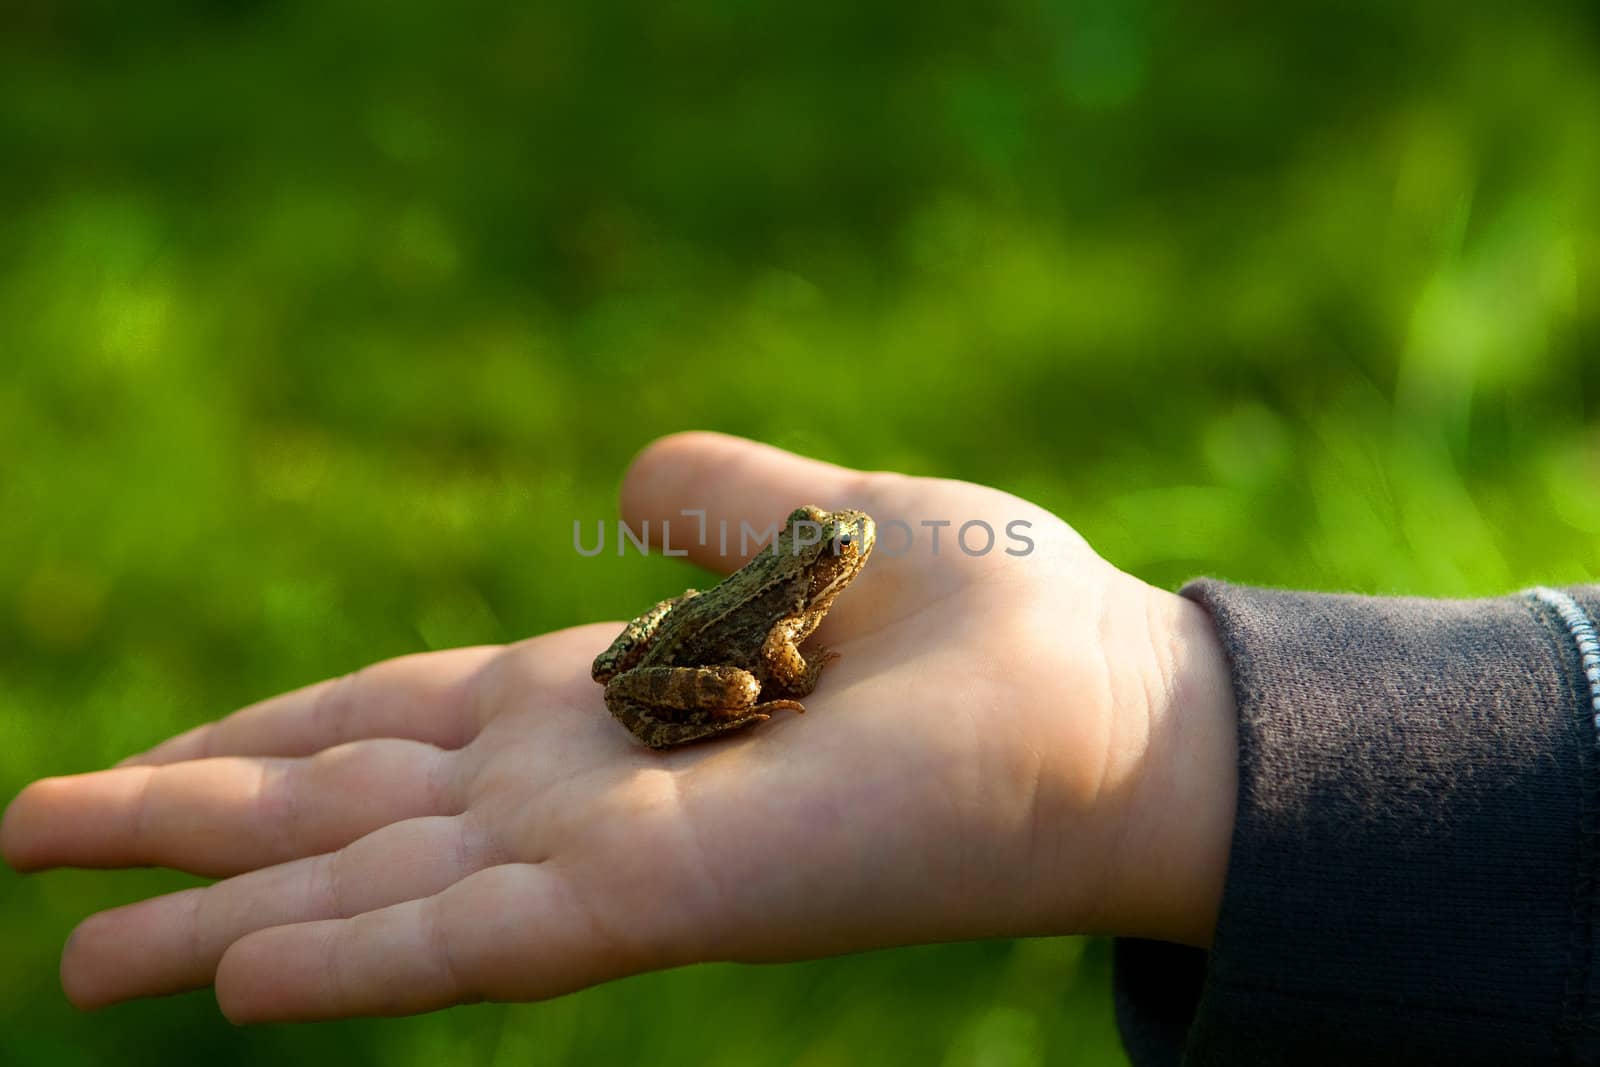 A small frog sitting on the hand